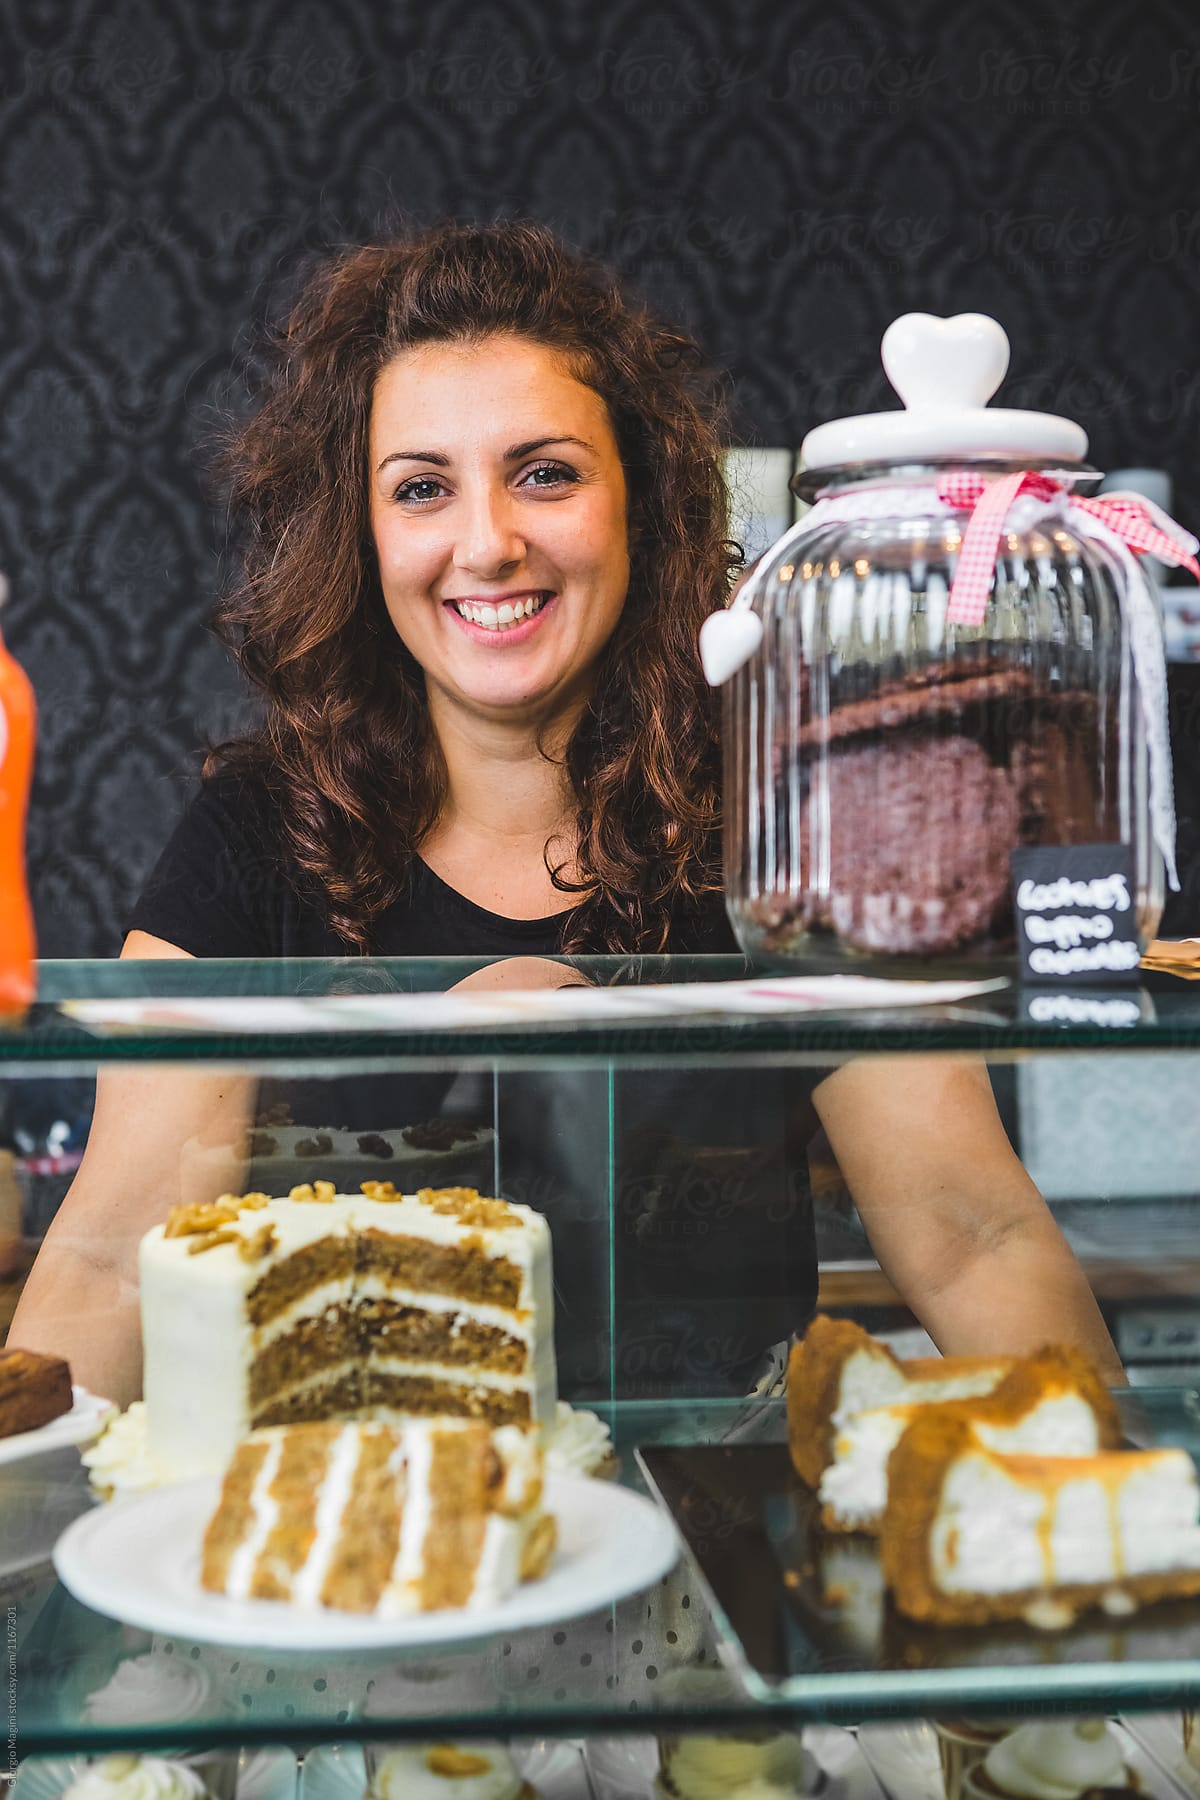 Portrait of Woman Owning a Bakery Business